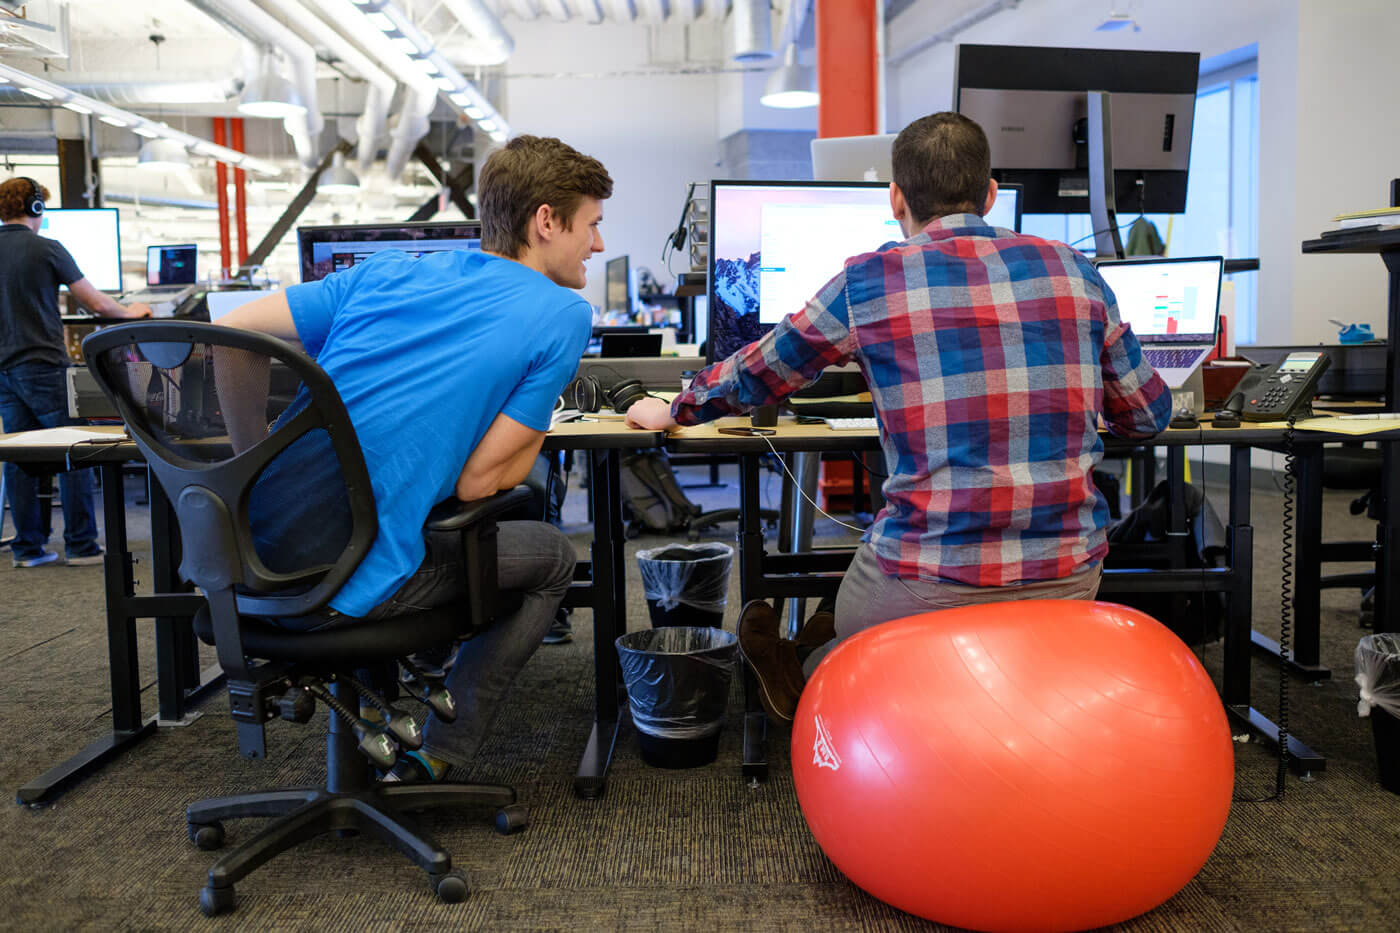 employee on chair and bouncy ball